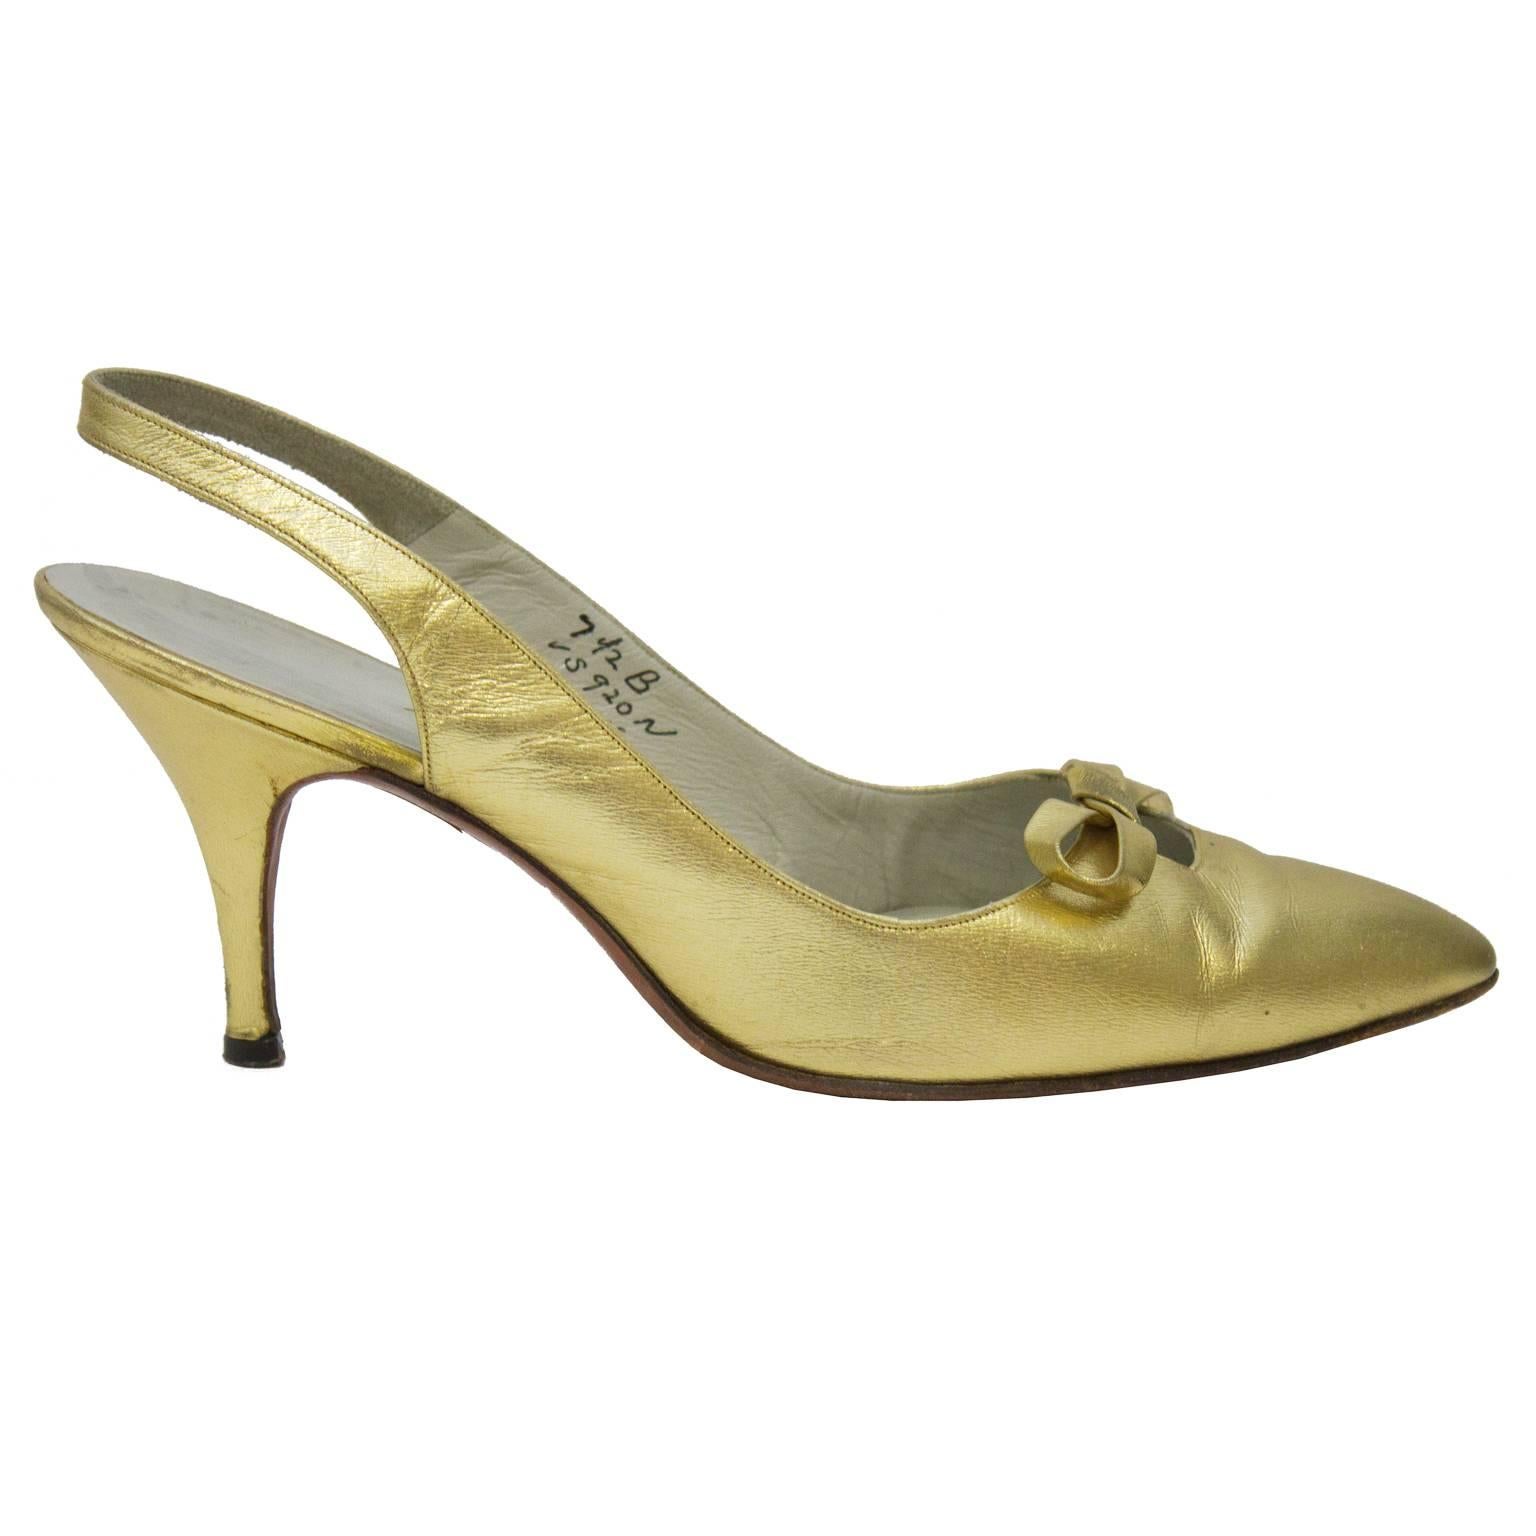 1950’s Roger Vivier gold leather pointed toe slingback heels. Shoe features a small cutout with a bow at the throat. Cream leather interior. Excellent vintage condition. Classic elegant style with moderate heel. Size US 7.5B  

Sole Length: 9.8